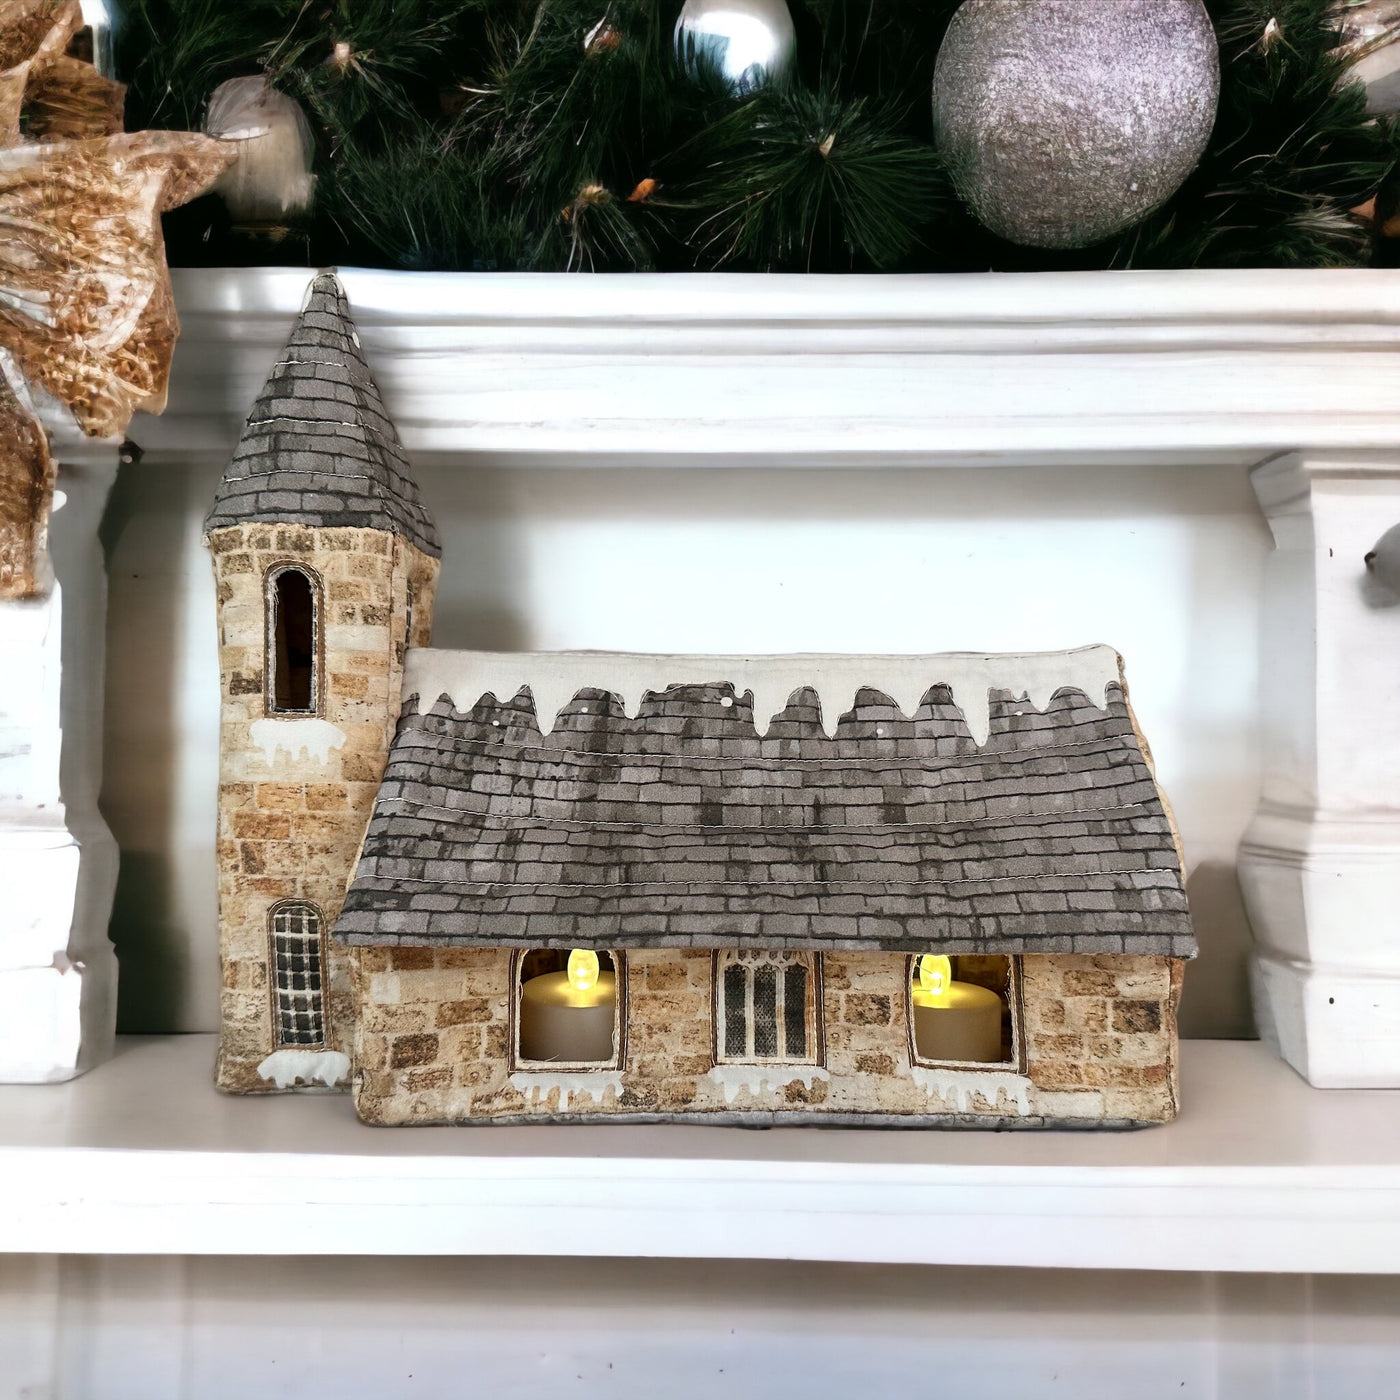 The Christmas Village Church Sewing Kit